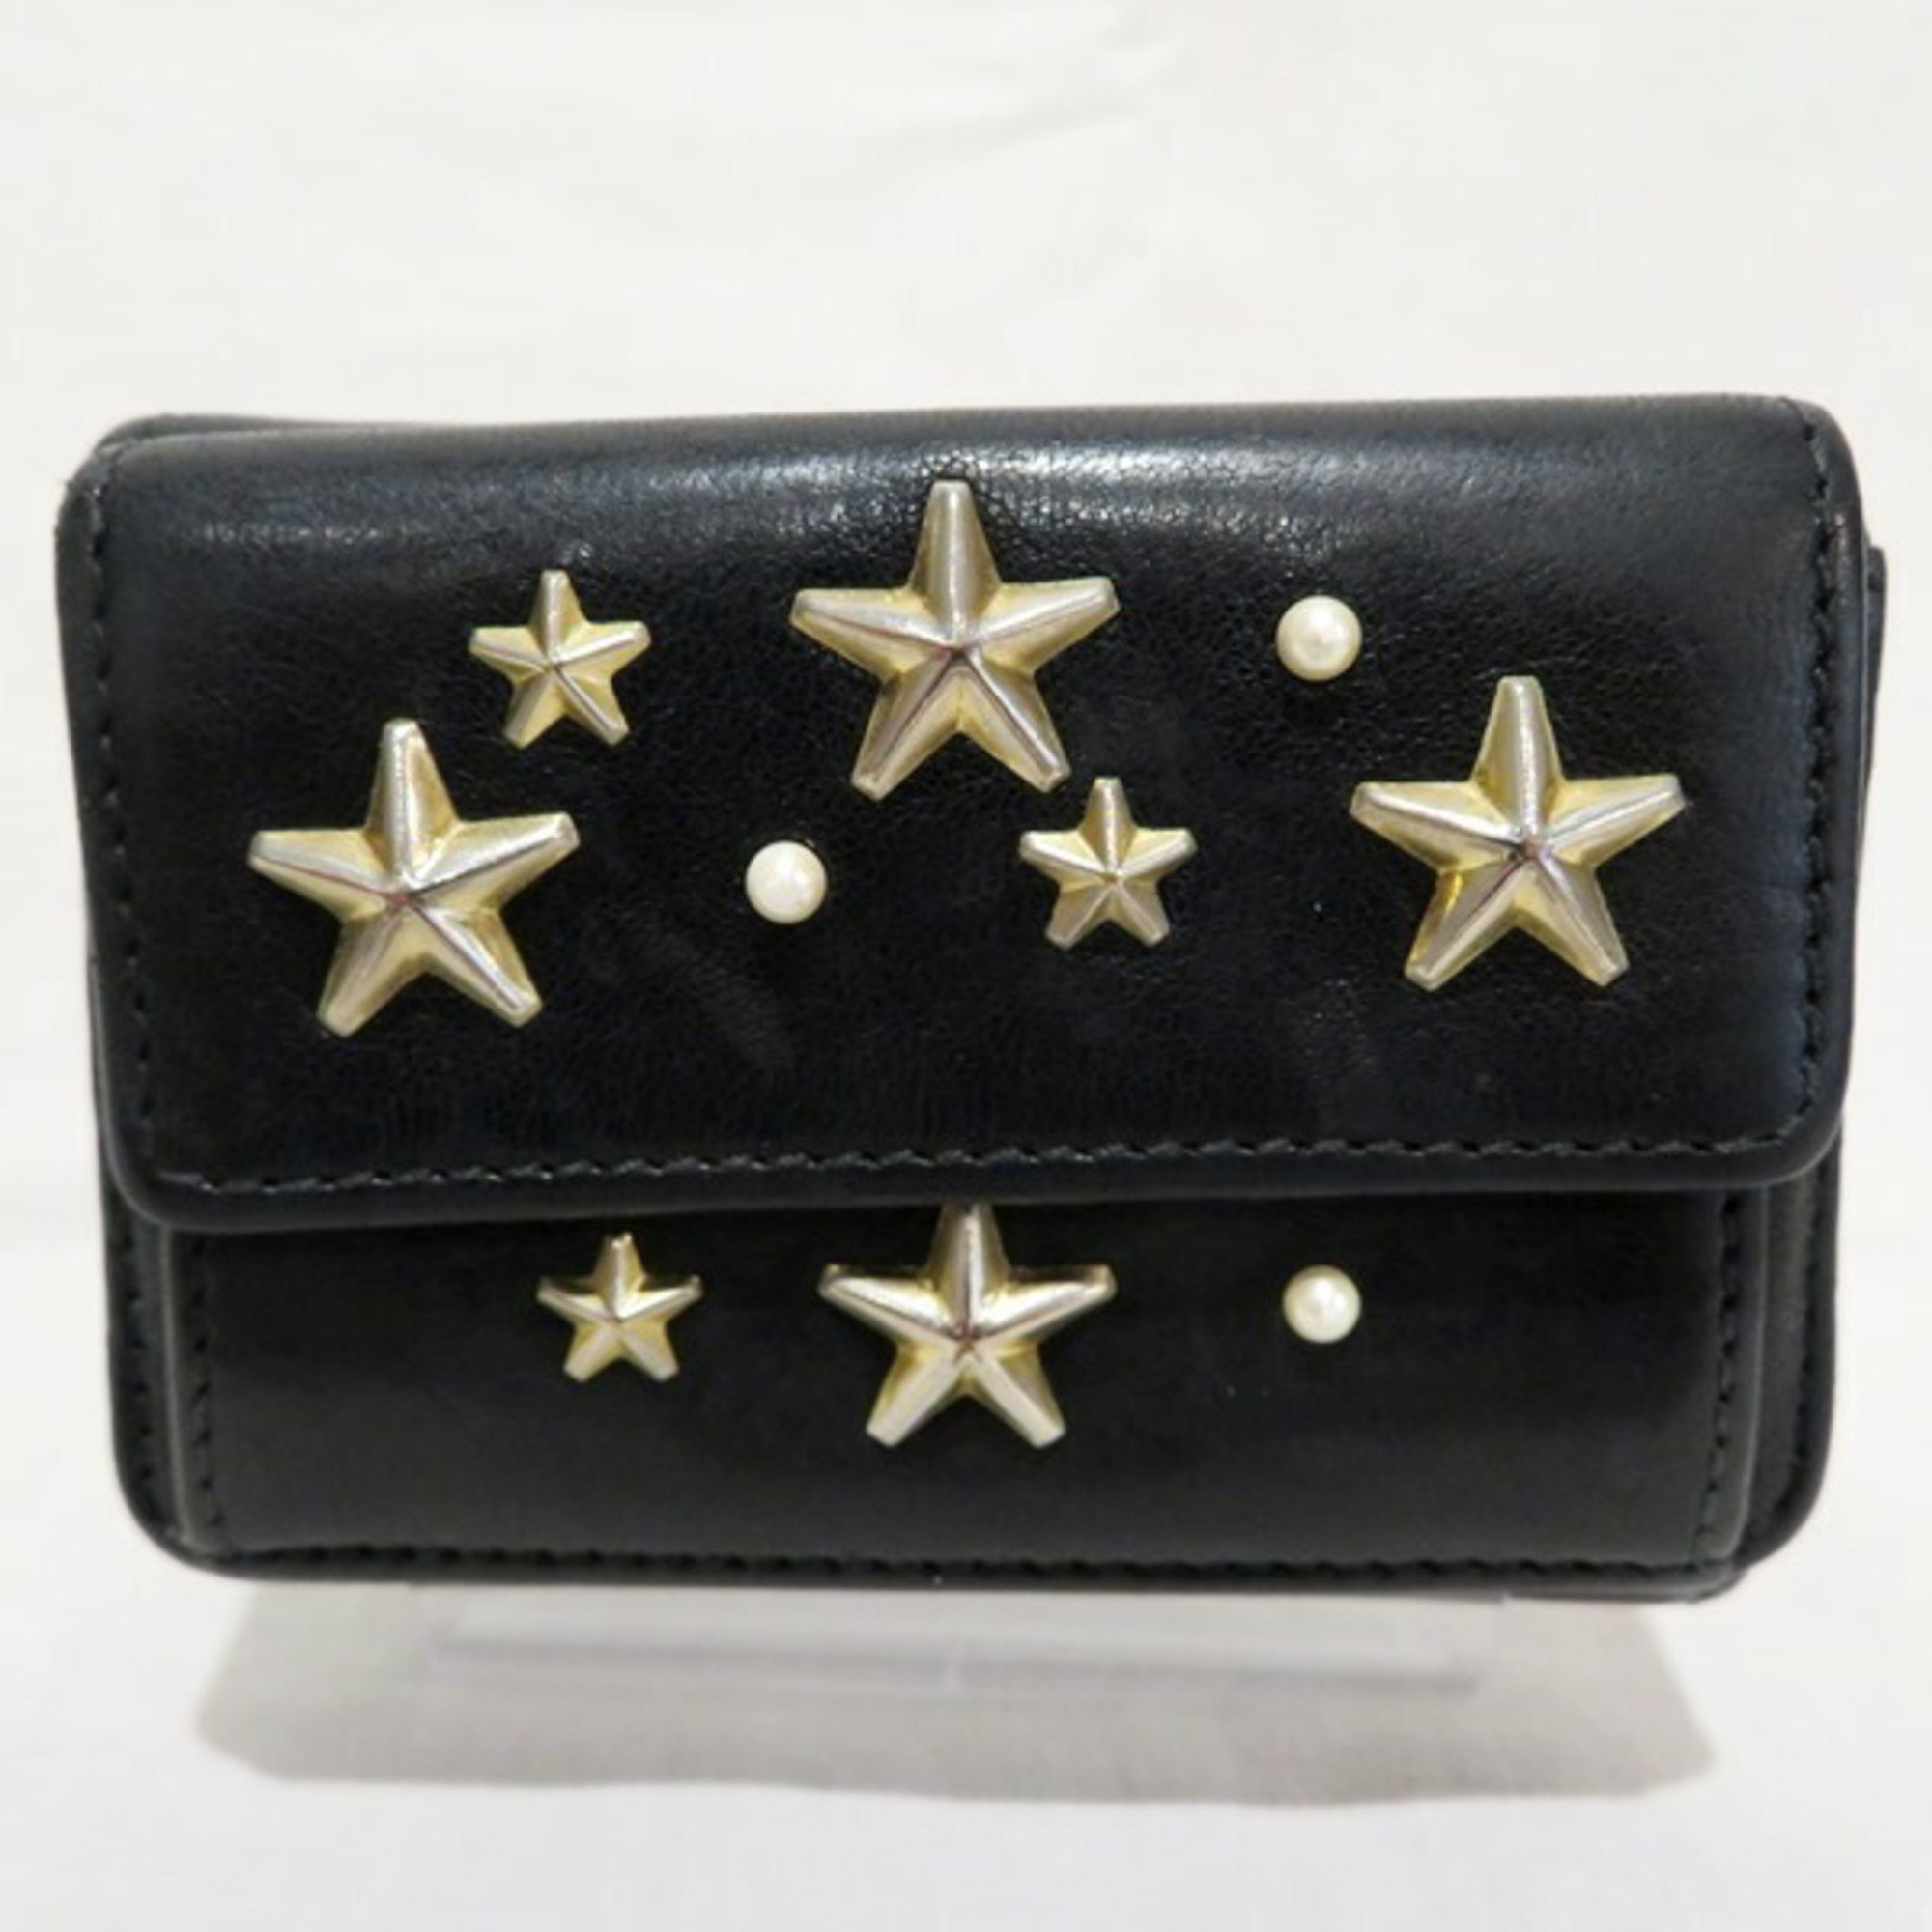 Jimmy Choo Star Studded Leather Compact Trifold Wallet Women's